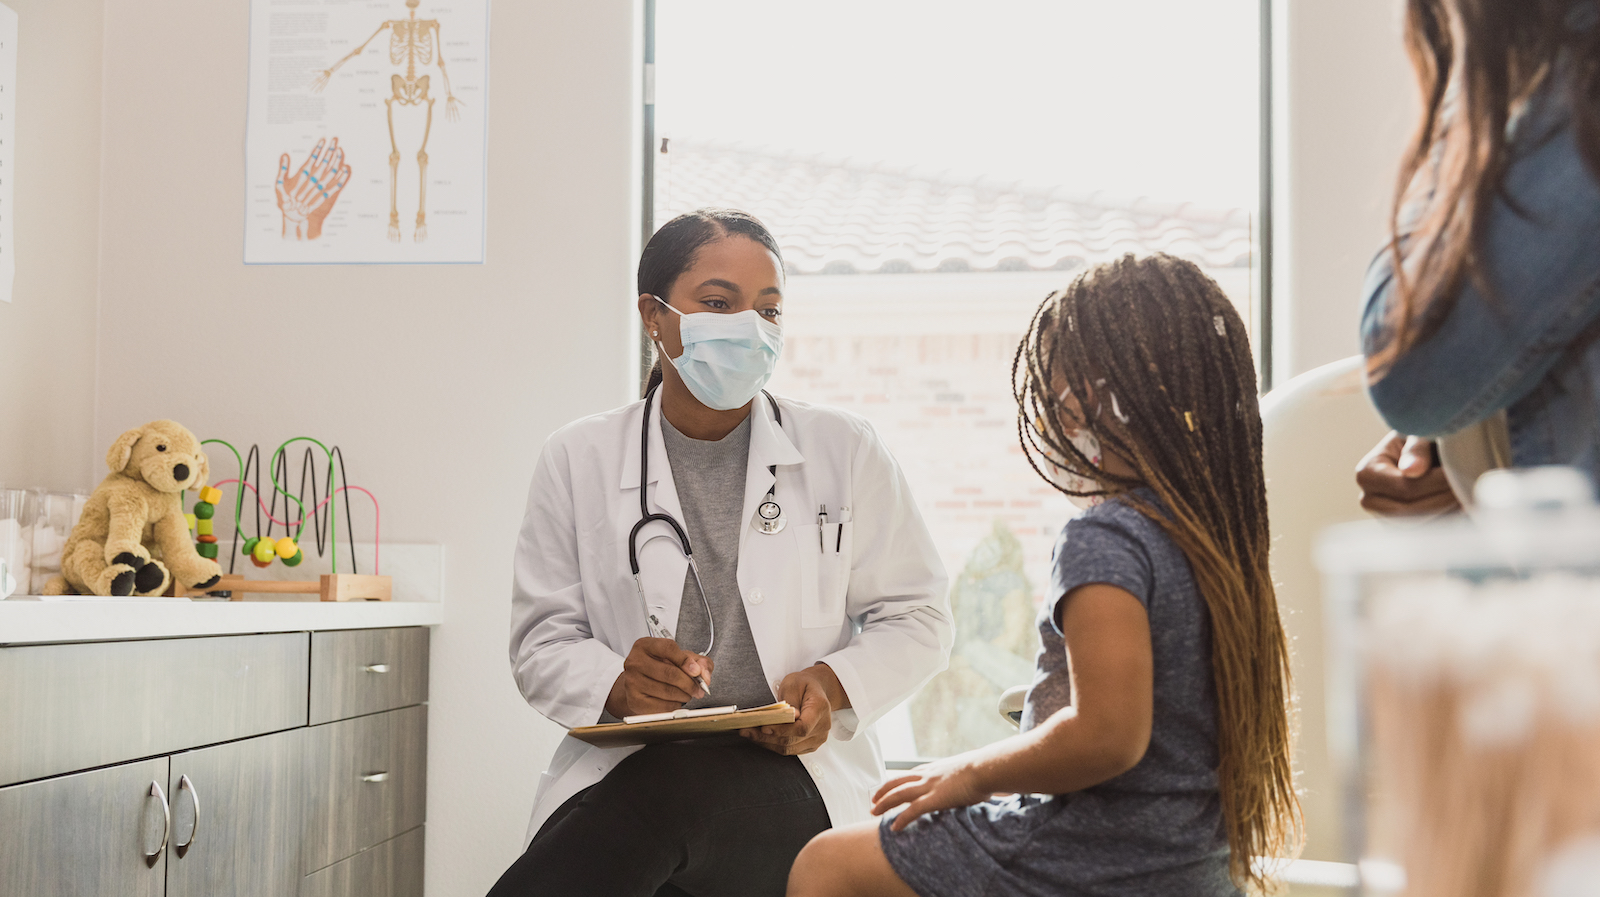 Pediatricians say climate conversations should be part of any doctor’s visit